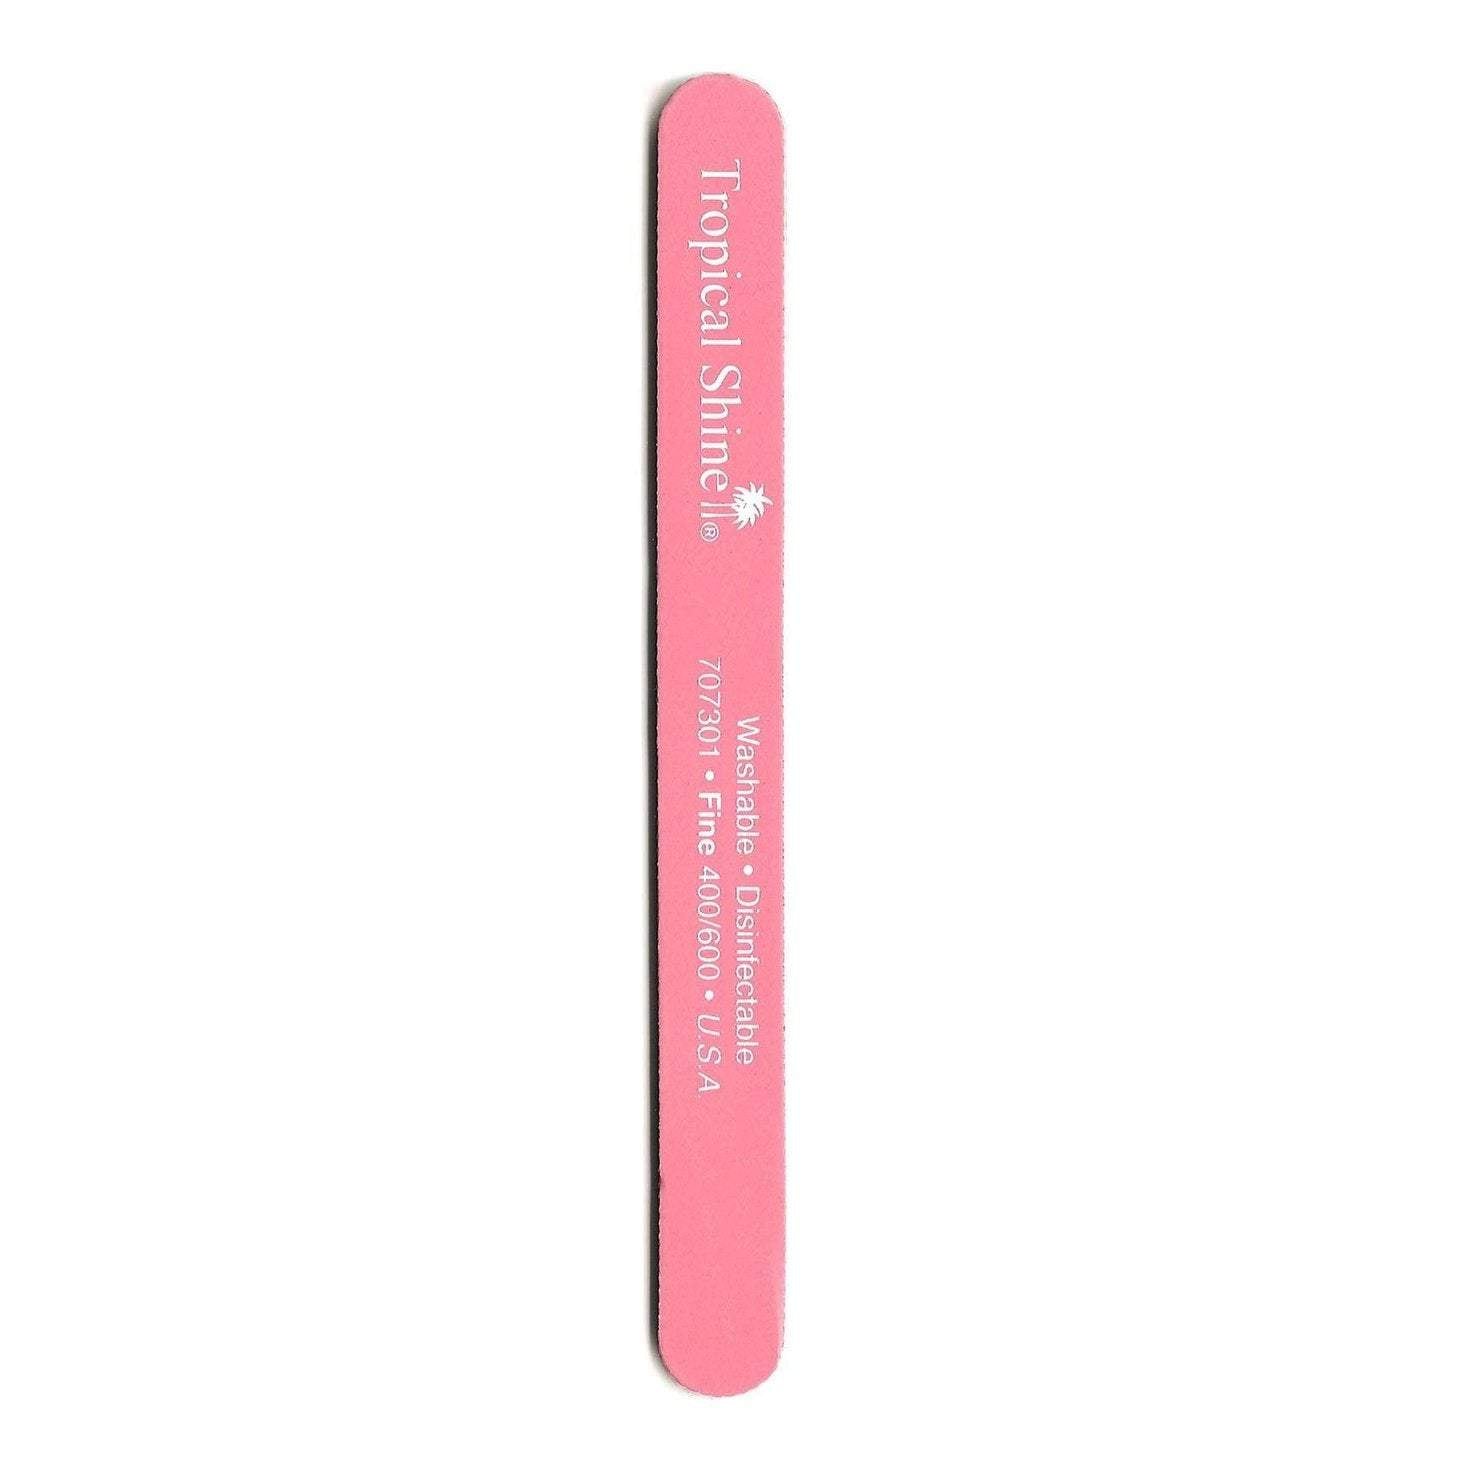 Tropical Shine Nail File Pink File 400/ 600 (Fine/ Extra Fine) 7 1/2 in x 3/4 in Large Size (707301)-Tropical Shine-Brand_Tropical Shine,Collection_Nails,Collection_Tools and Brushes,Nail_Tools,Tool_Nails,TROP_Fine Files